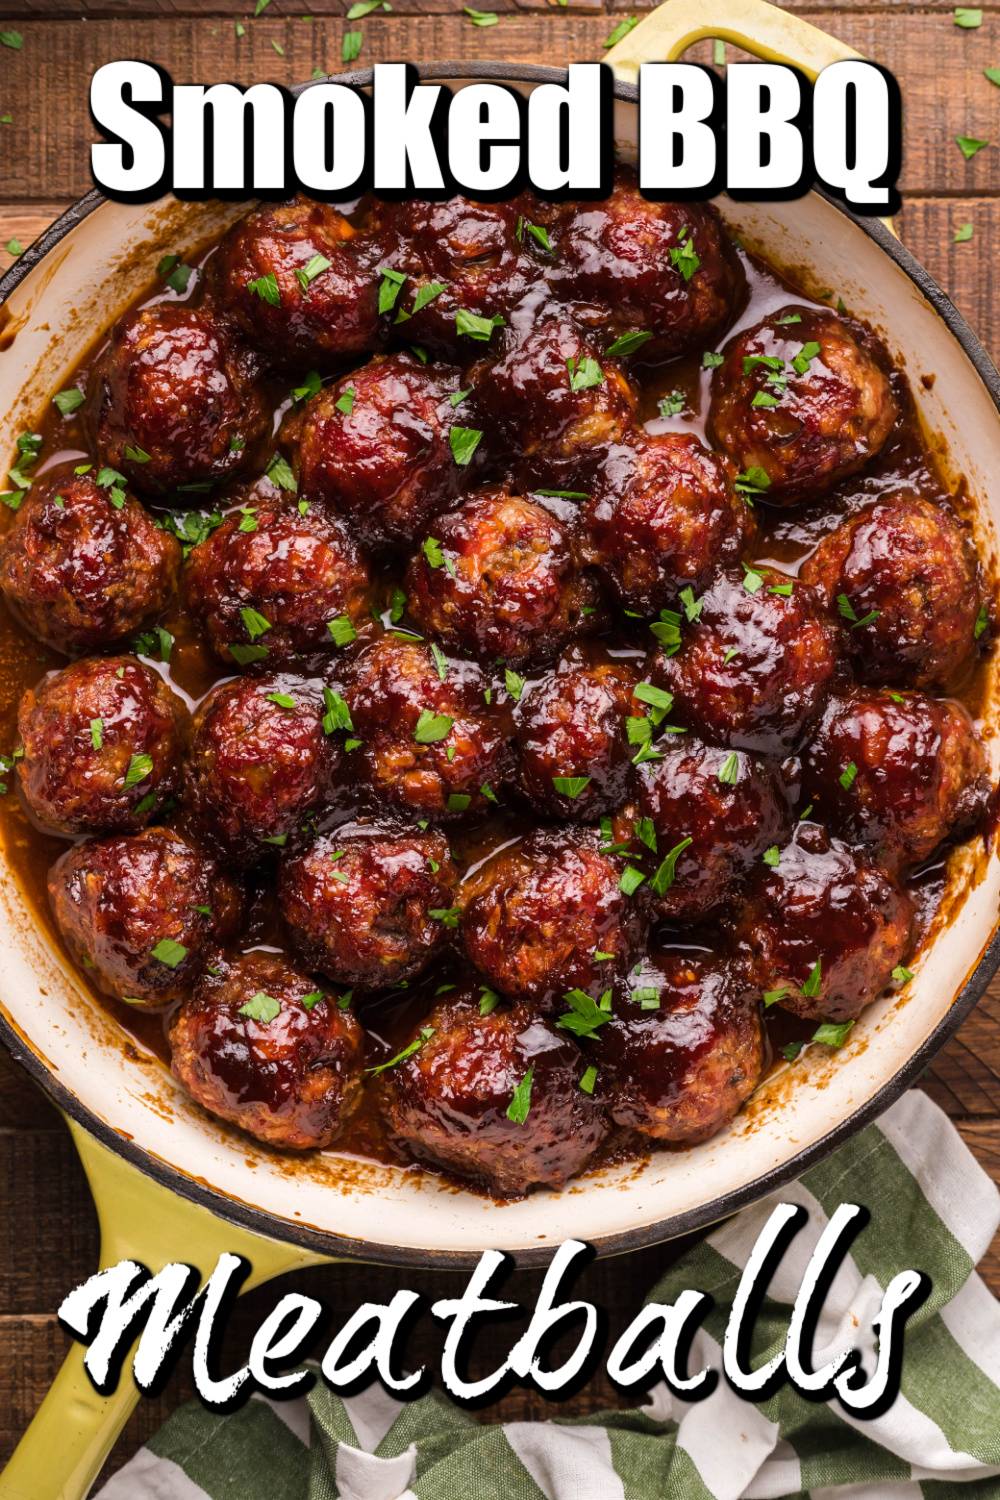 These smoked BBQ meatballs aren't your mamma's meatballs! Smoky, sweet and a little spicy, they are the perfect little bite!